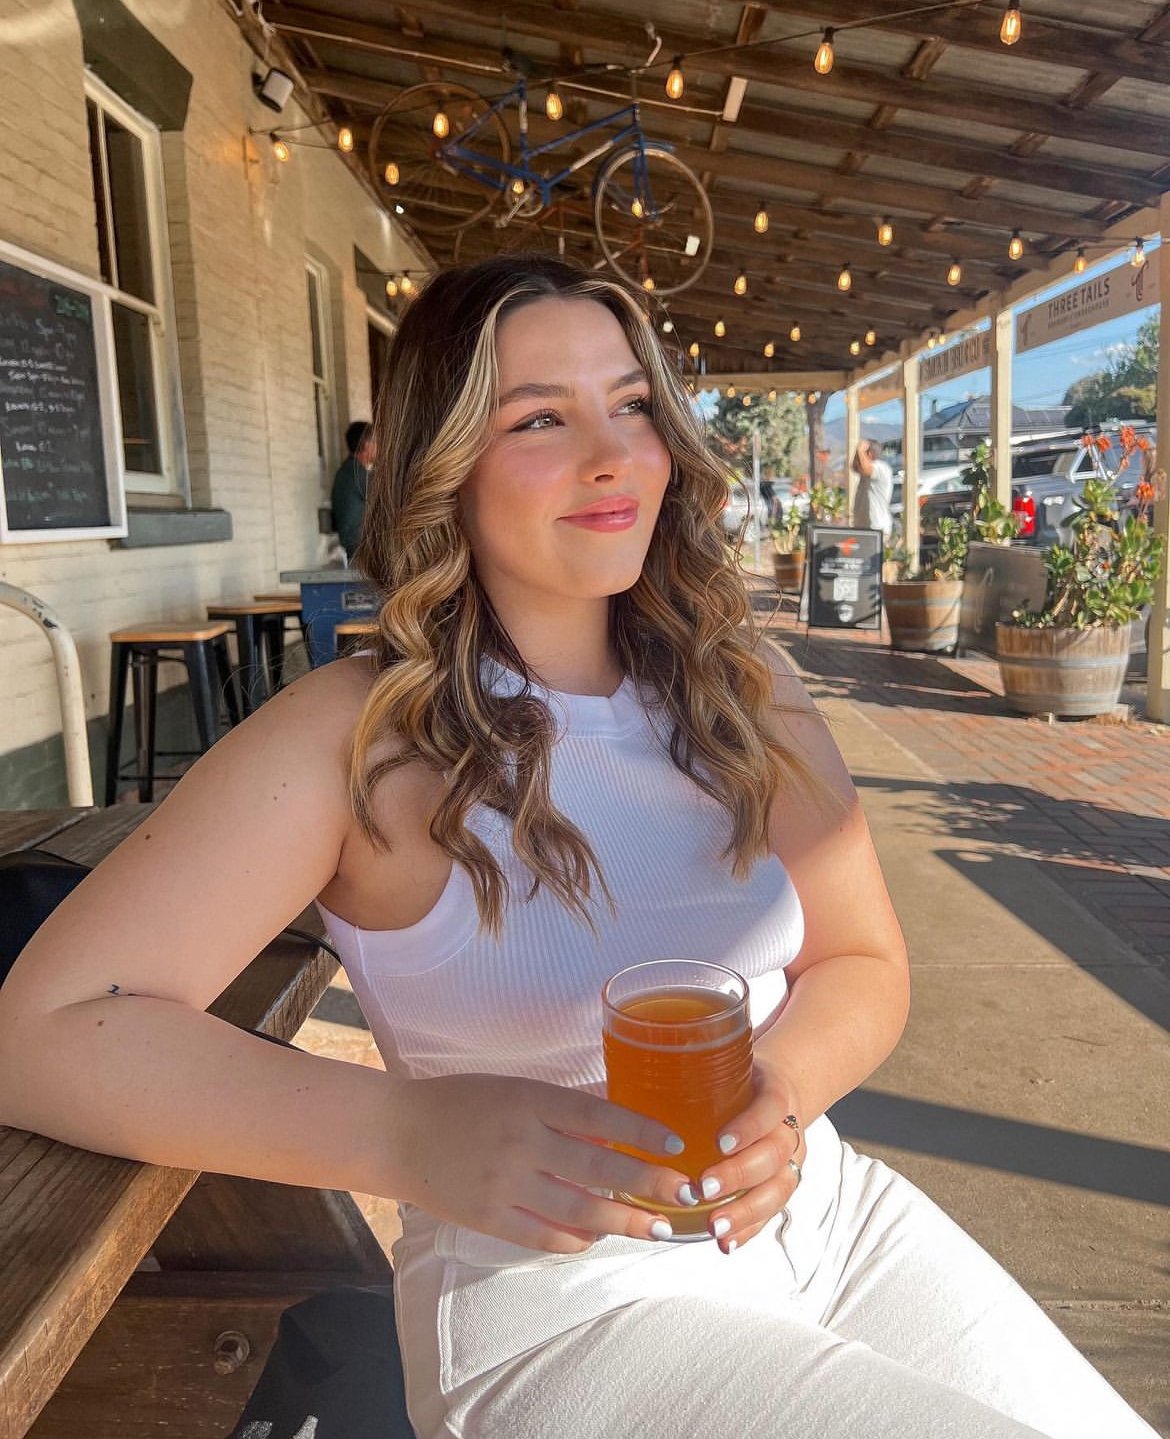 Weekend, here we come 😍 We&rsquo;re getting inspired by this fun snap from @hannahrose.smith as we wind down for the weekend. Join us from midday all weekend for good drinks, food &amp; company 🍻
 
 
 
 
 
 
 

 
__
#threetails #threetailsbrewery #